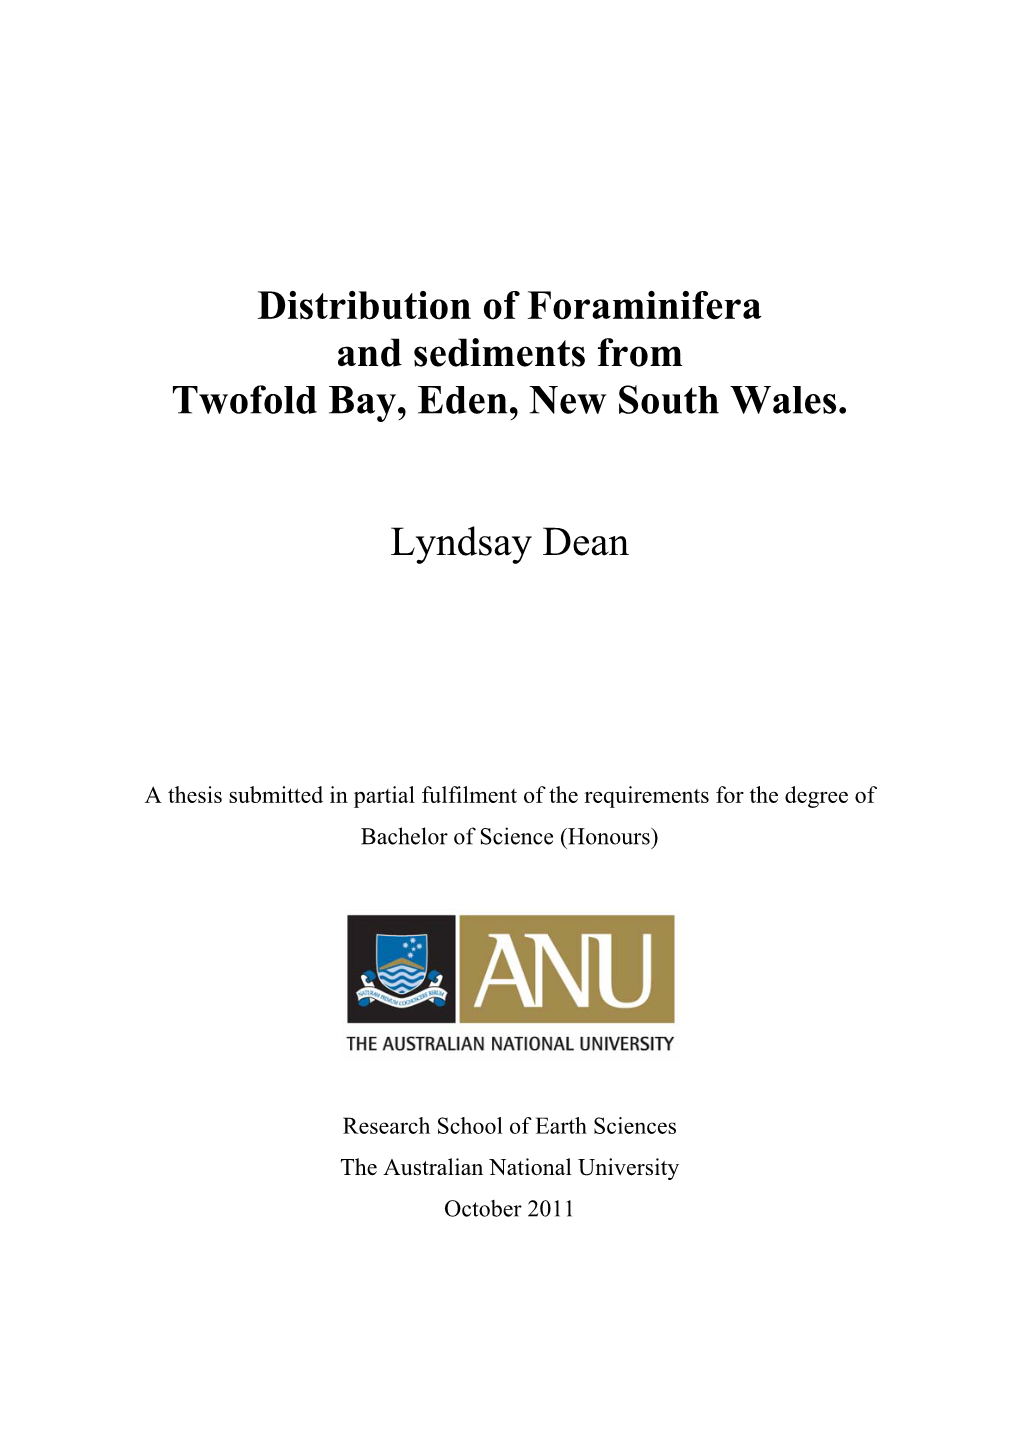 Distribution of Foraminifera and Sediments from Twofold Bay, Eden, New South Wales